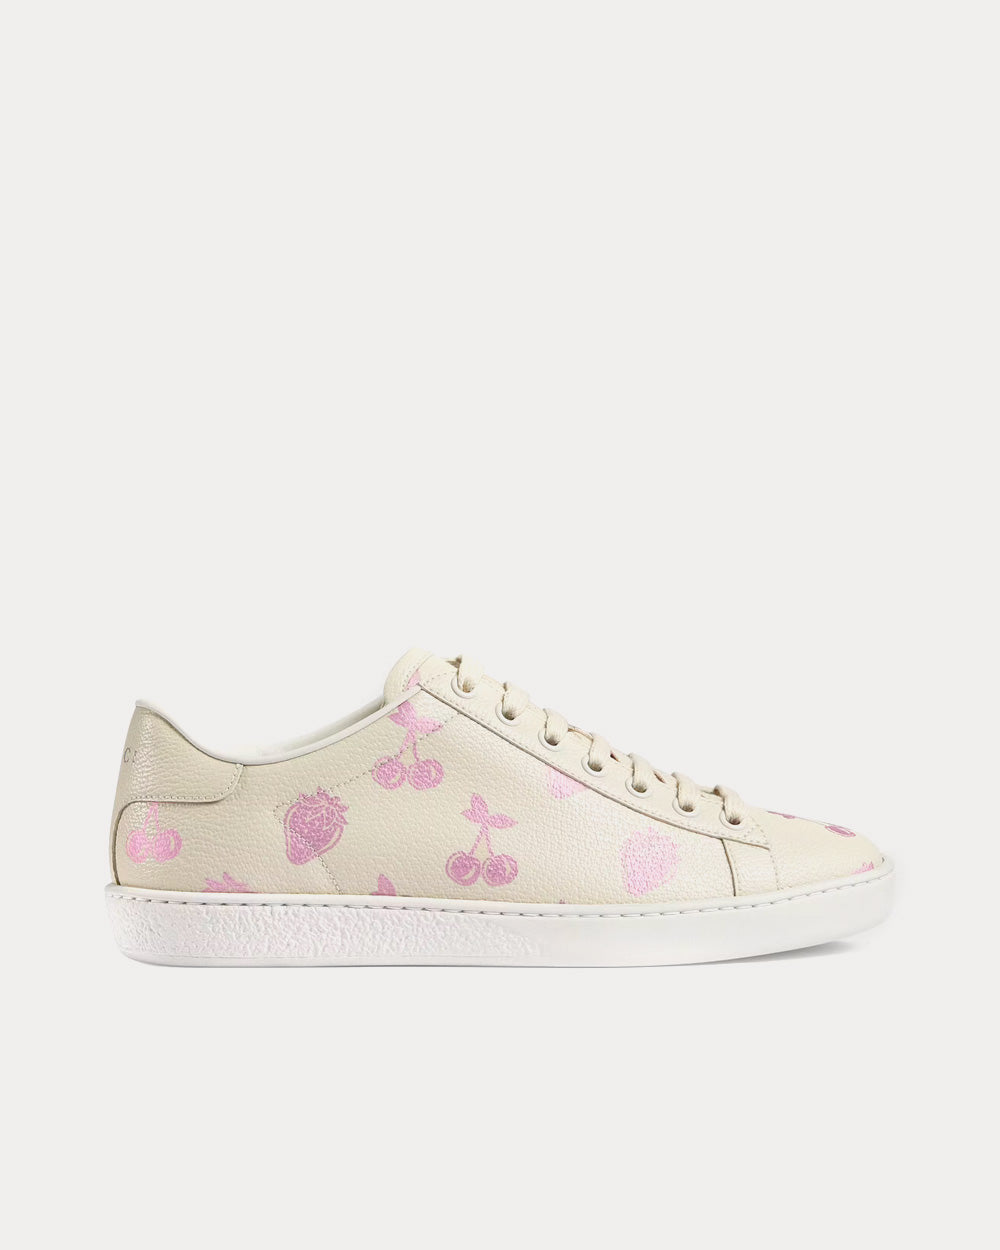 Gucci - Ace Metallic Strawberry & Cherry Print White Low Top Sneakers